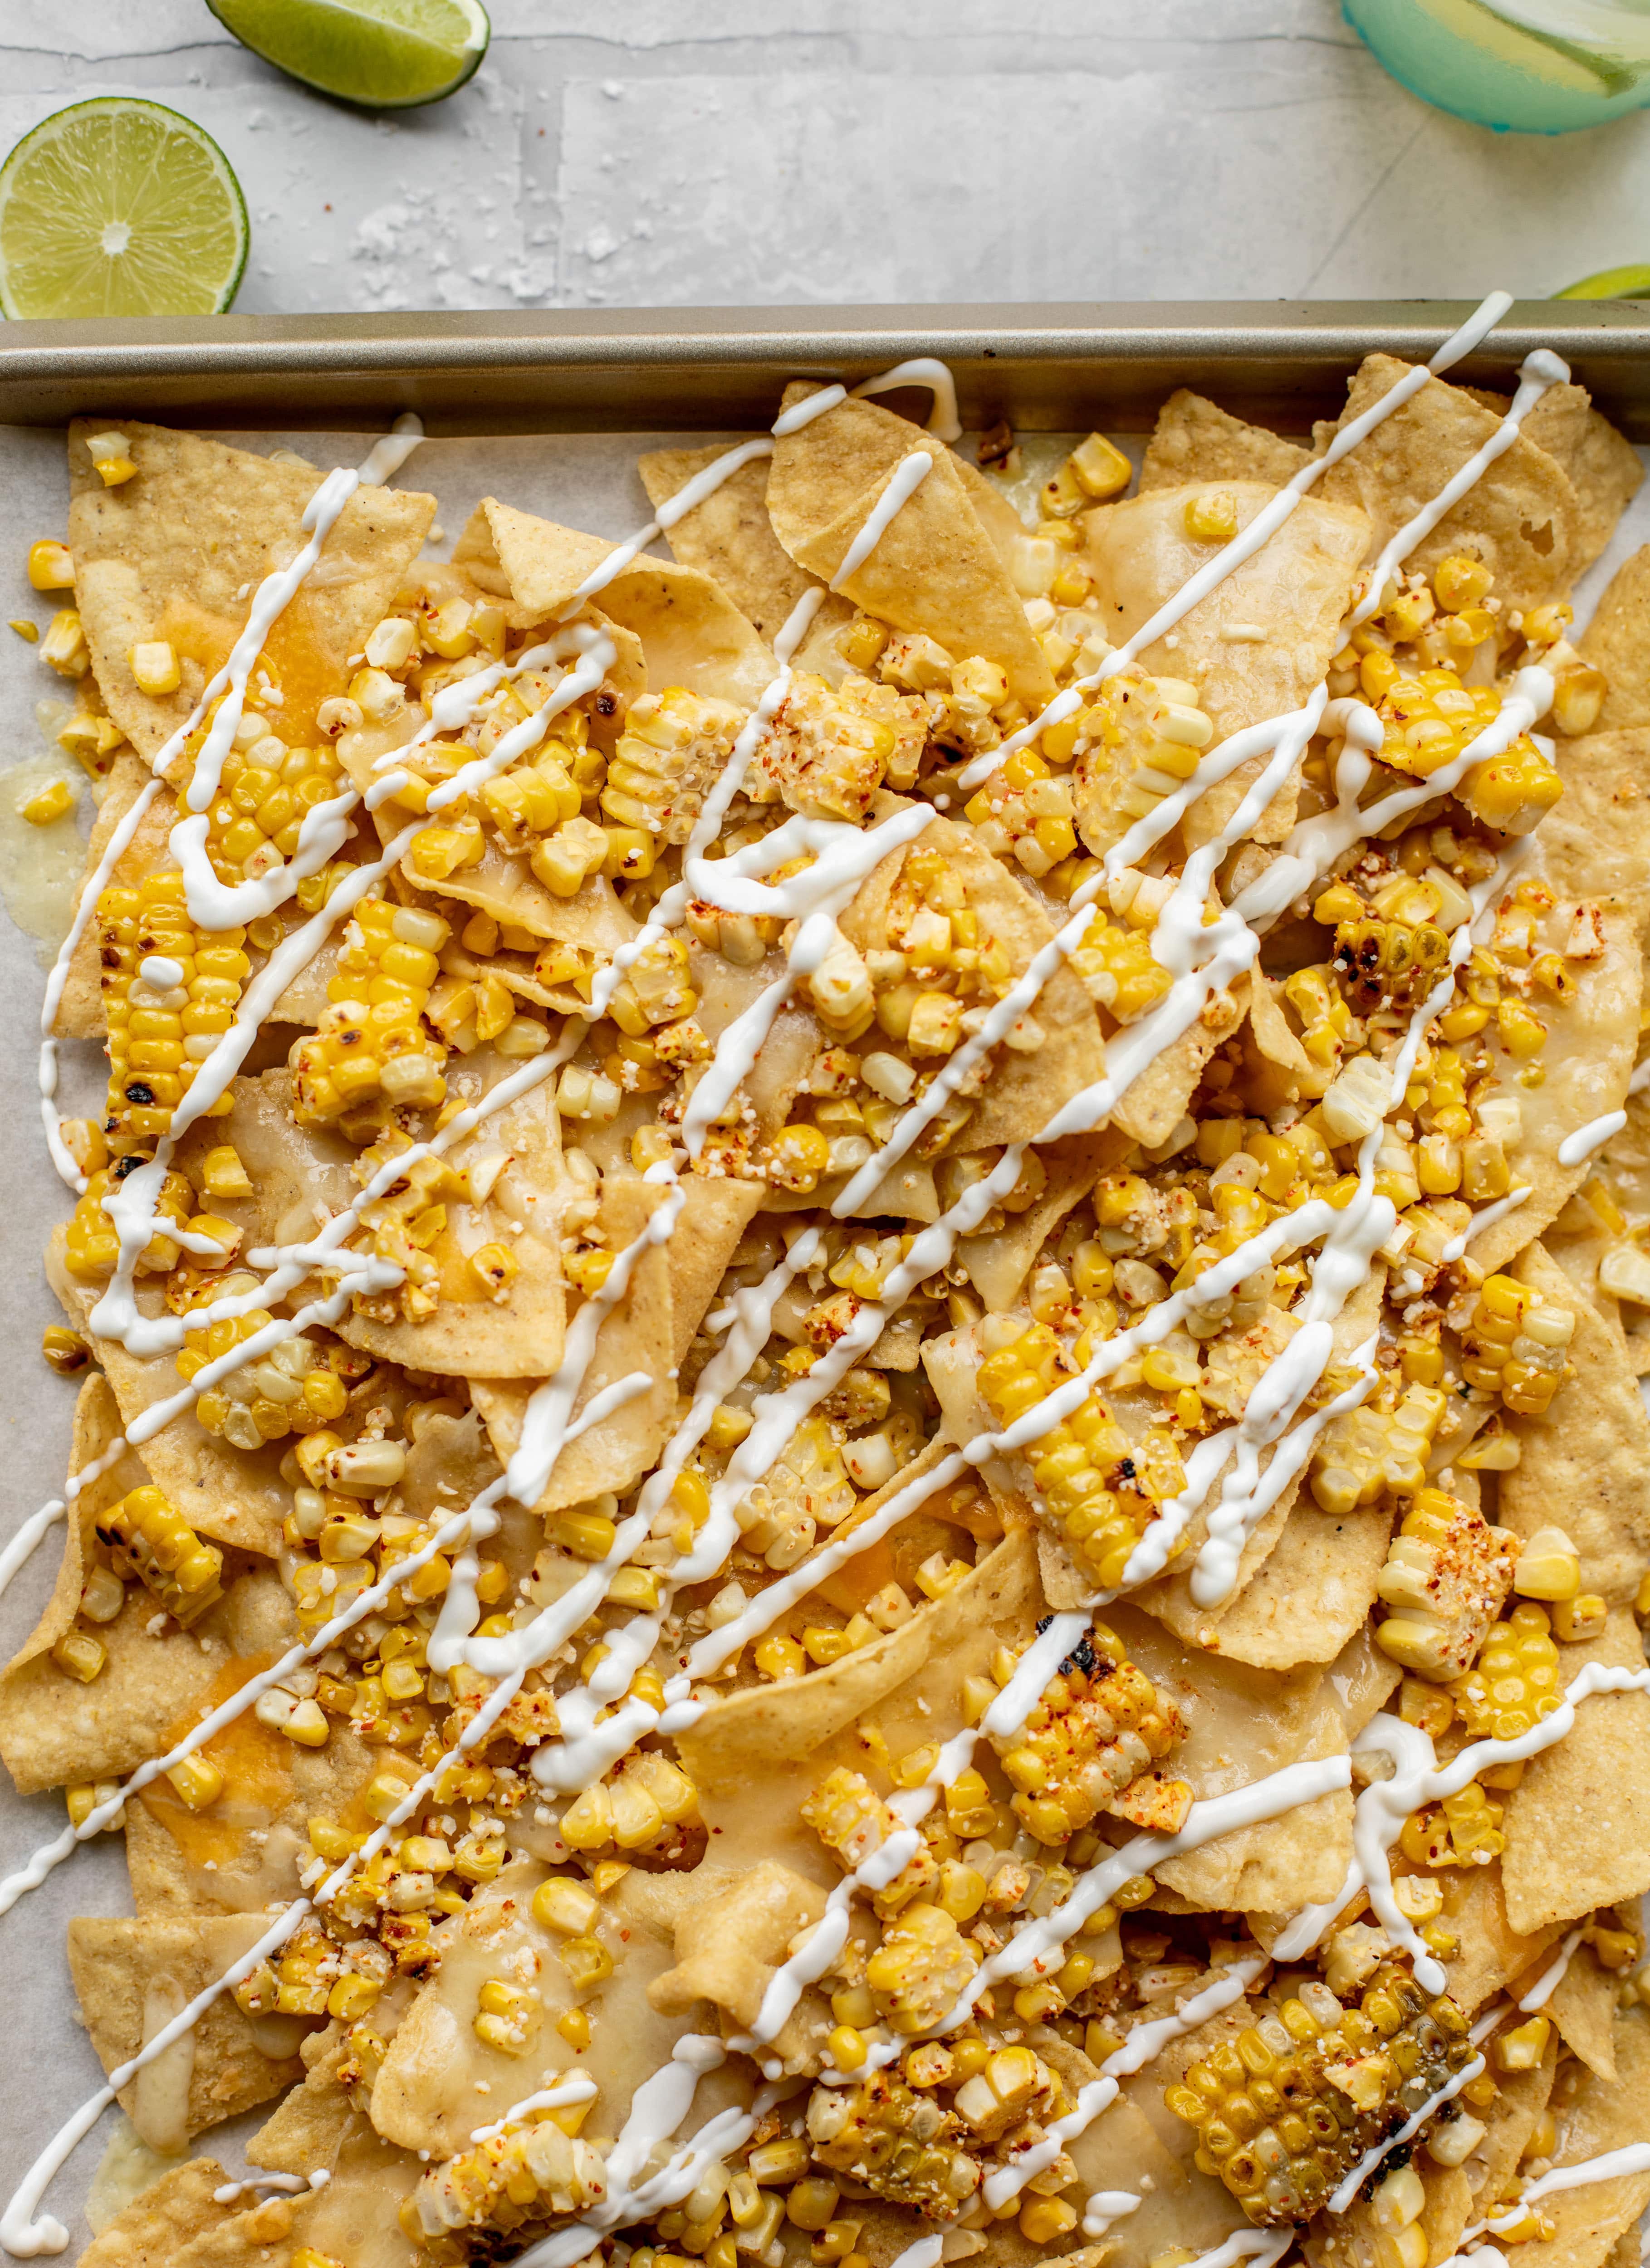 These sheet pan street corn nachos are ridiculously easy and delicious! Grilled corn, chili, lime, tons of cheese and all the flavor you could dream of!